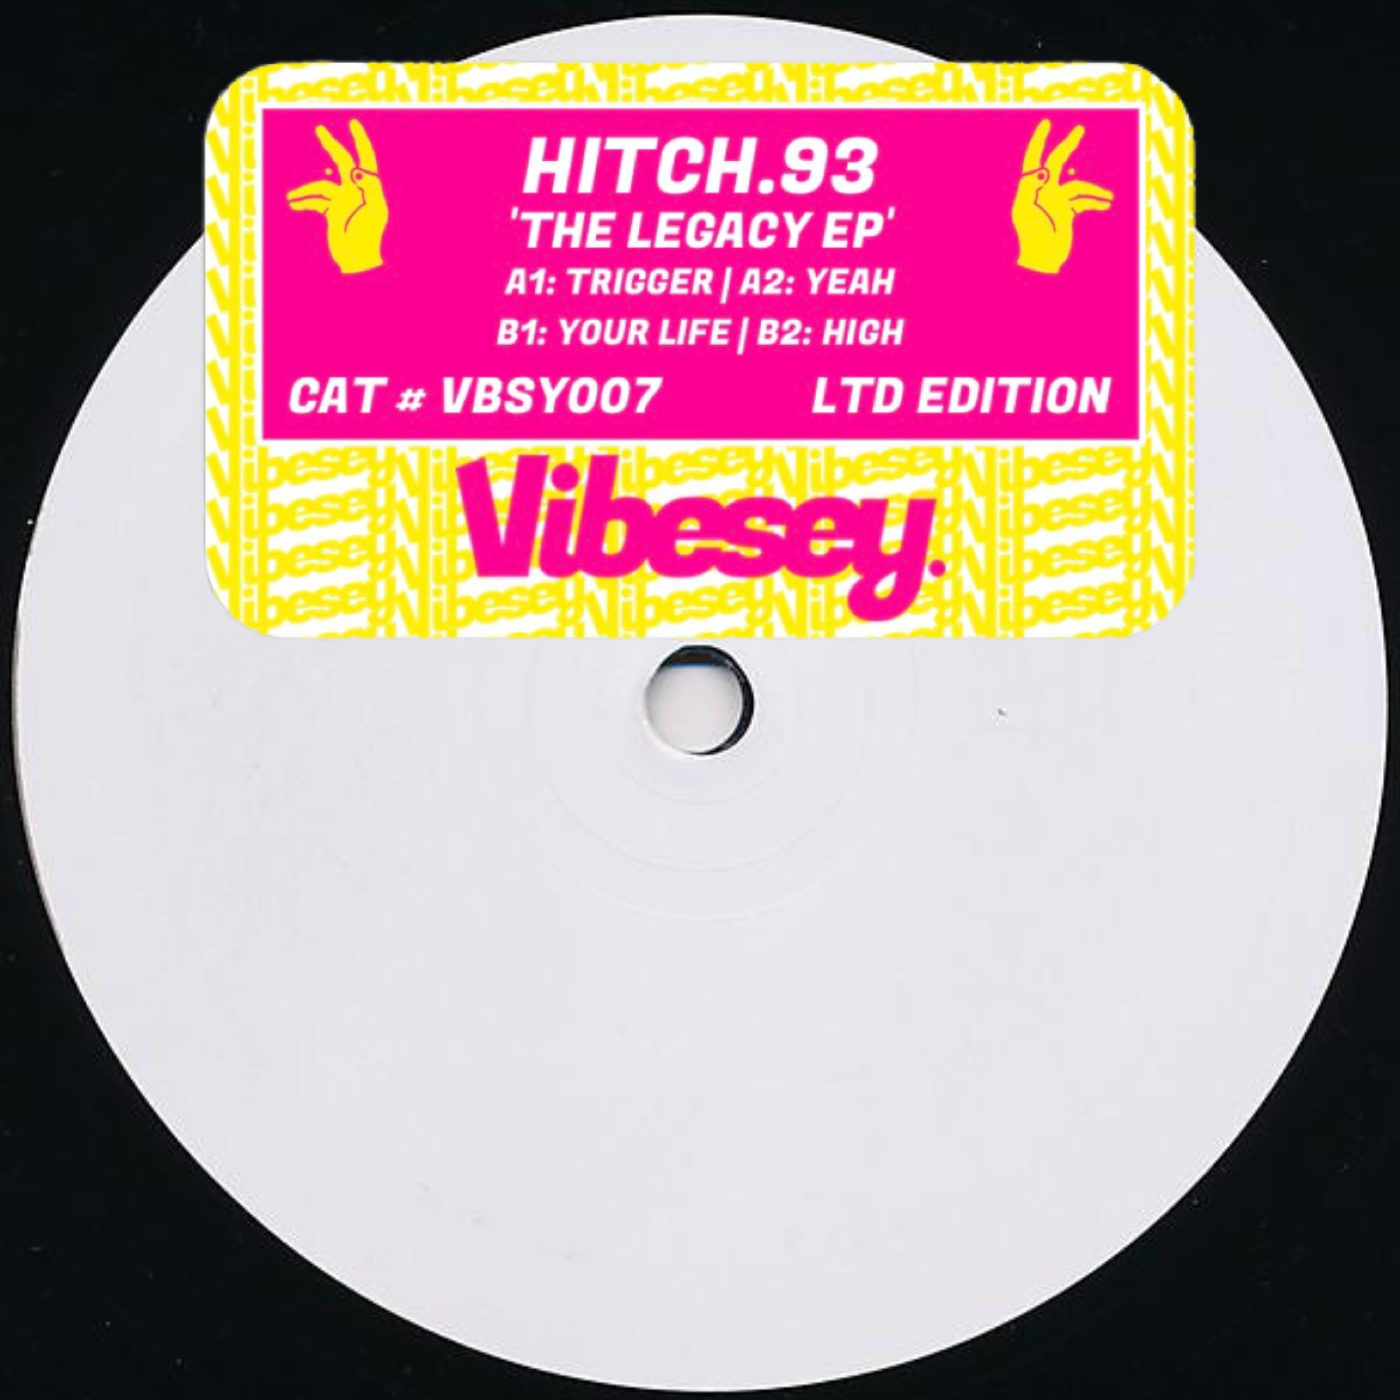 Hitch.93 - The Legacy EP